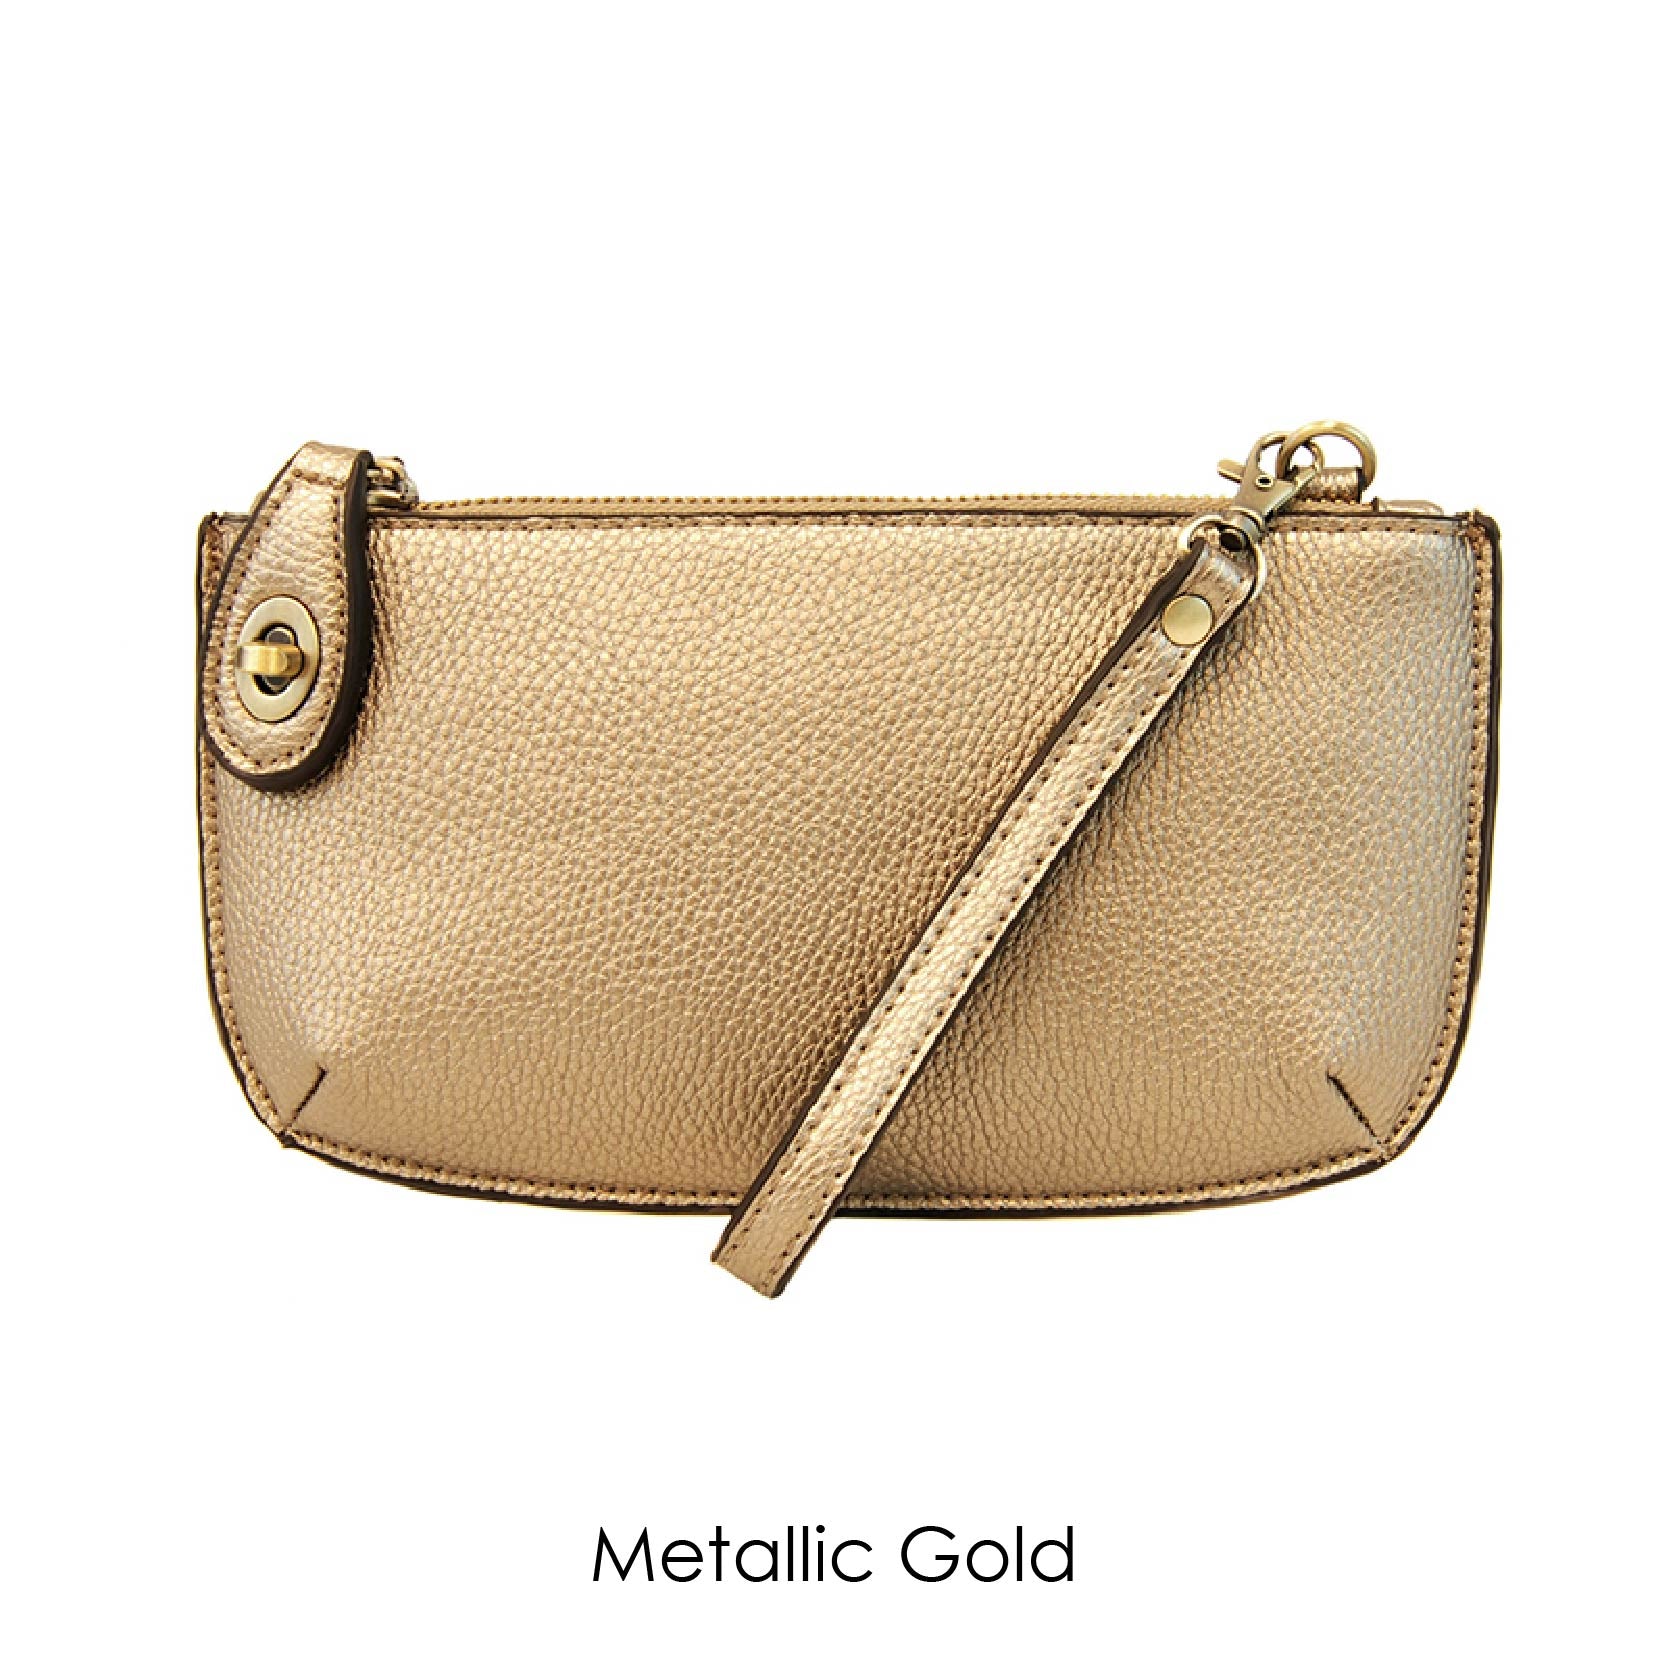 metallic gold leather clutch on a white background